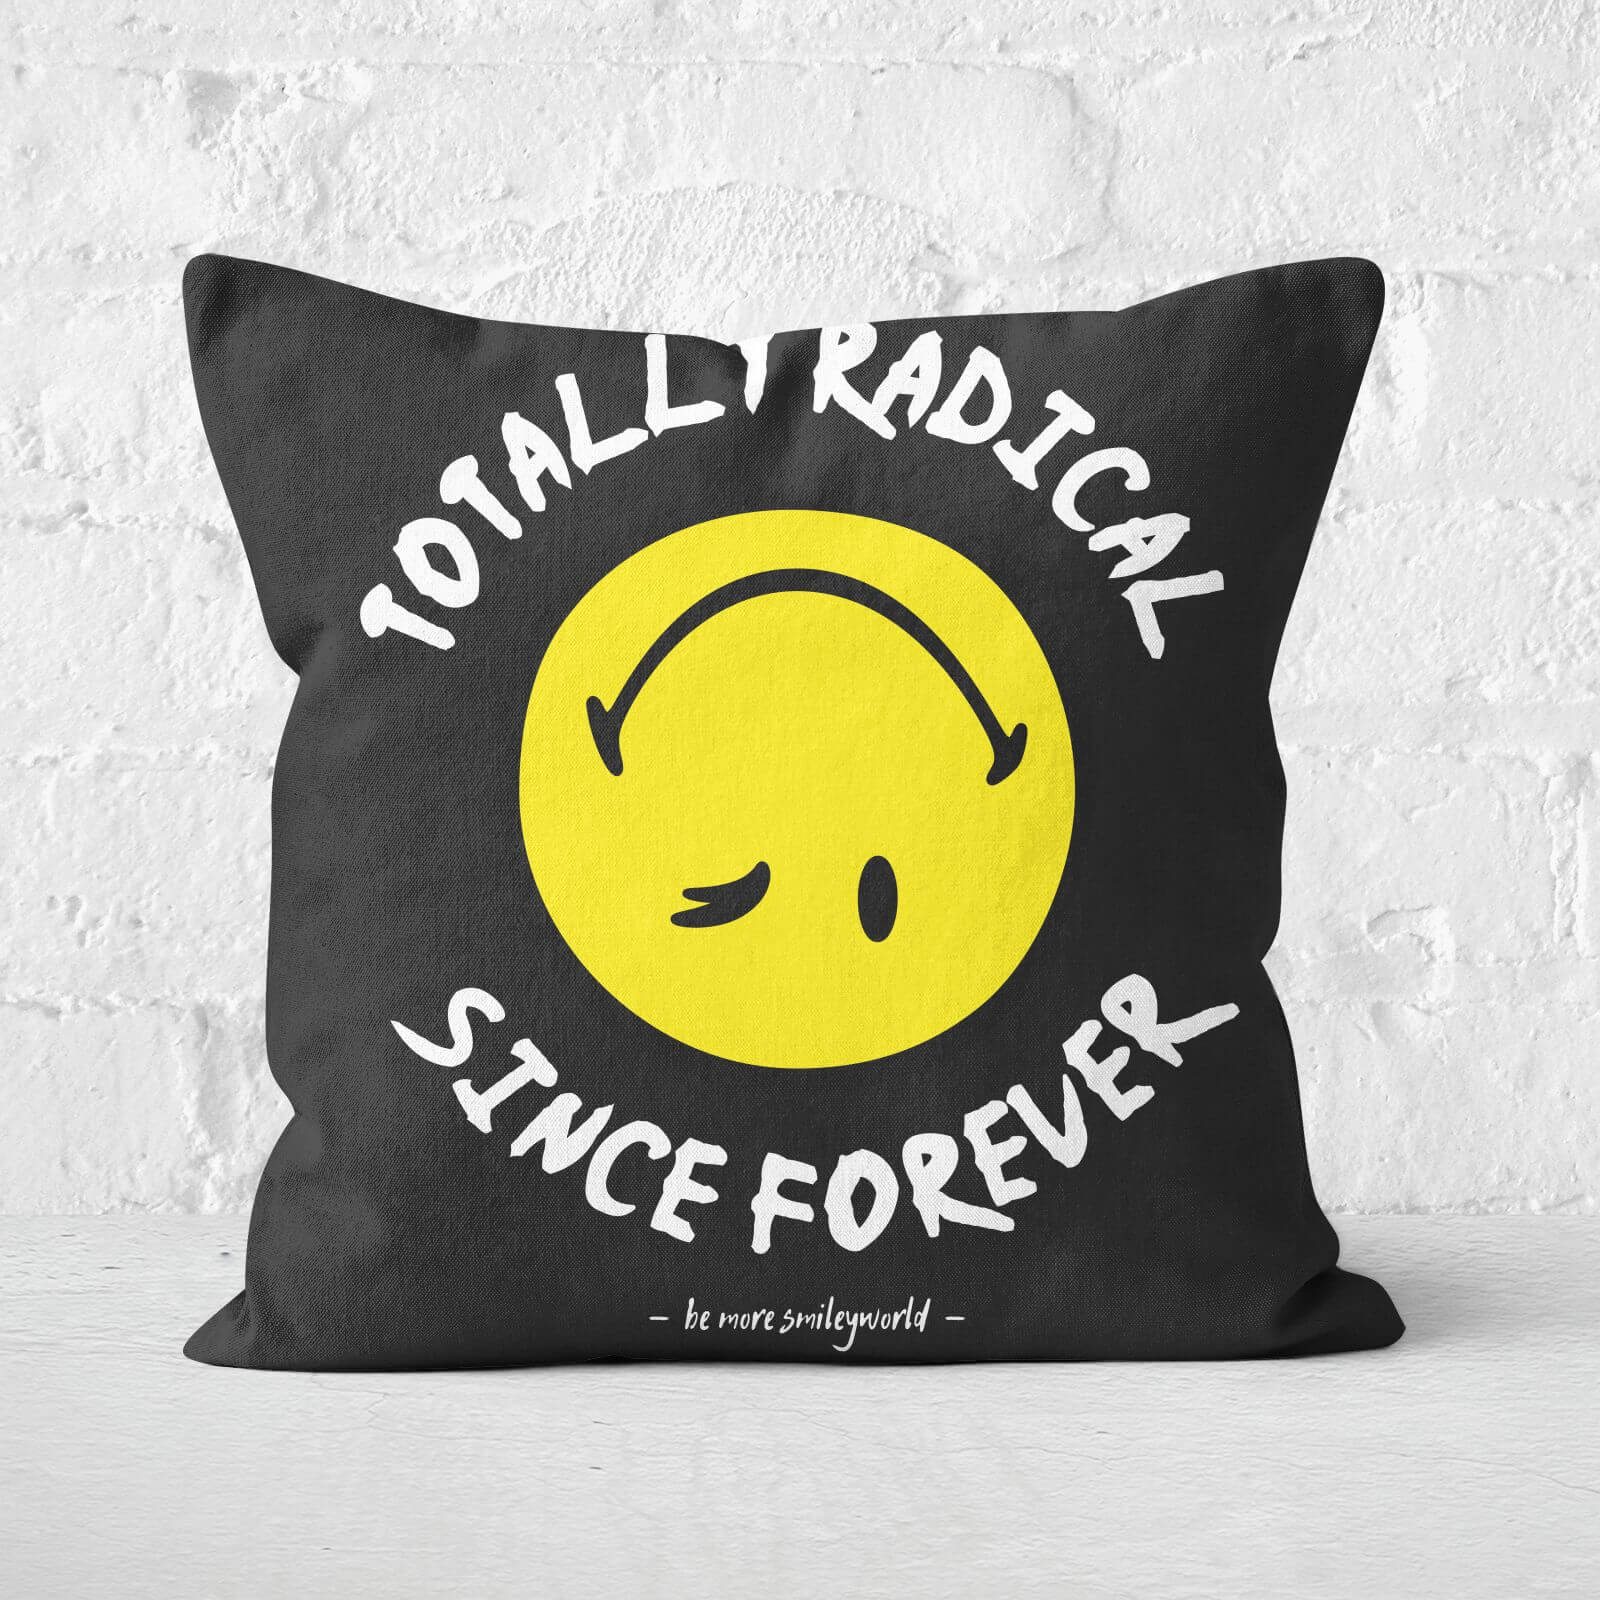 Totally Radical Since Forever Cushion Square Cushion - 60x60cm - Soft Touch